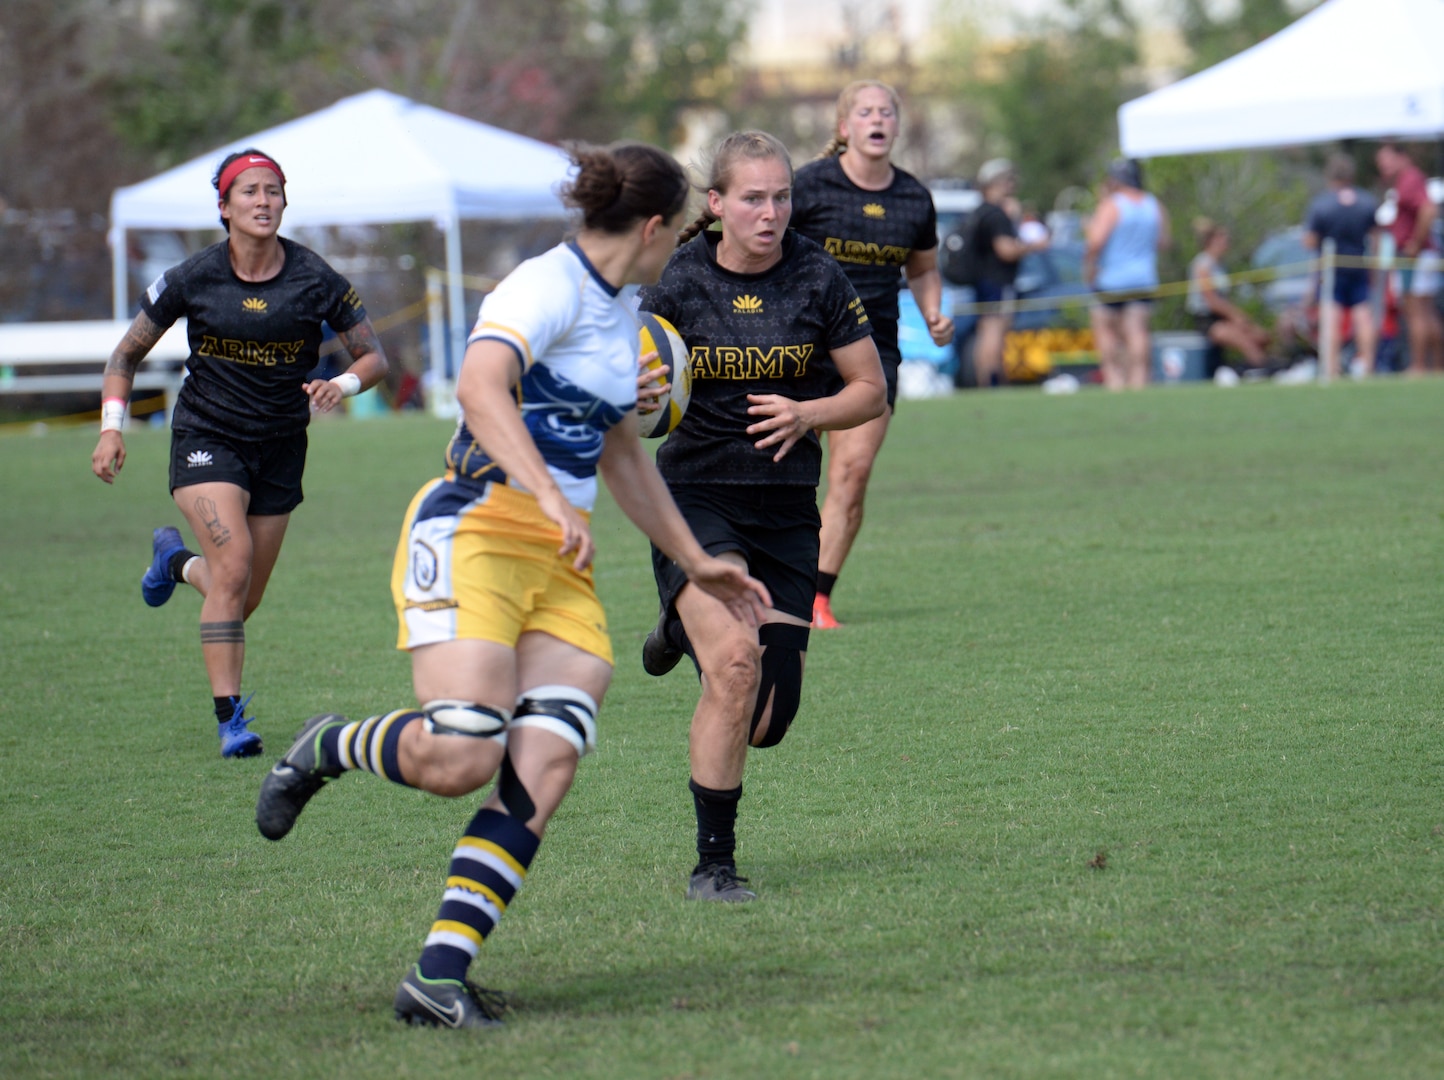 WILMINGTON, N.C. (June 6, 2019) -- Army faces off against Navy on day two of the inaugural Armed Forces Women's Rugby Championship held in Wilmington, N.C. July 5-7, 2019. This historic event features the best female rugby players from the Army, Marine Corps, Navy, Air Force, and Coast Guard, who will compete for the title of the first ever Women's Rugby Champs (U.S. Dept. of Defense photo by Chief Mass Communication Specialist Patrick Gordon/RELEASED)